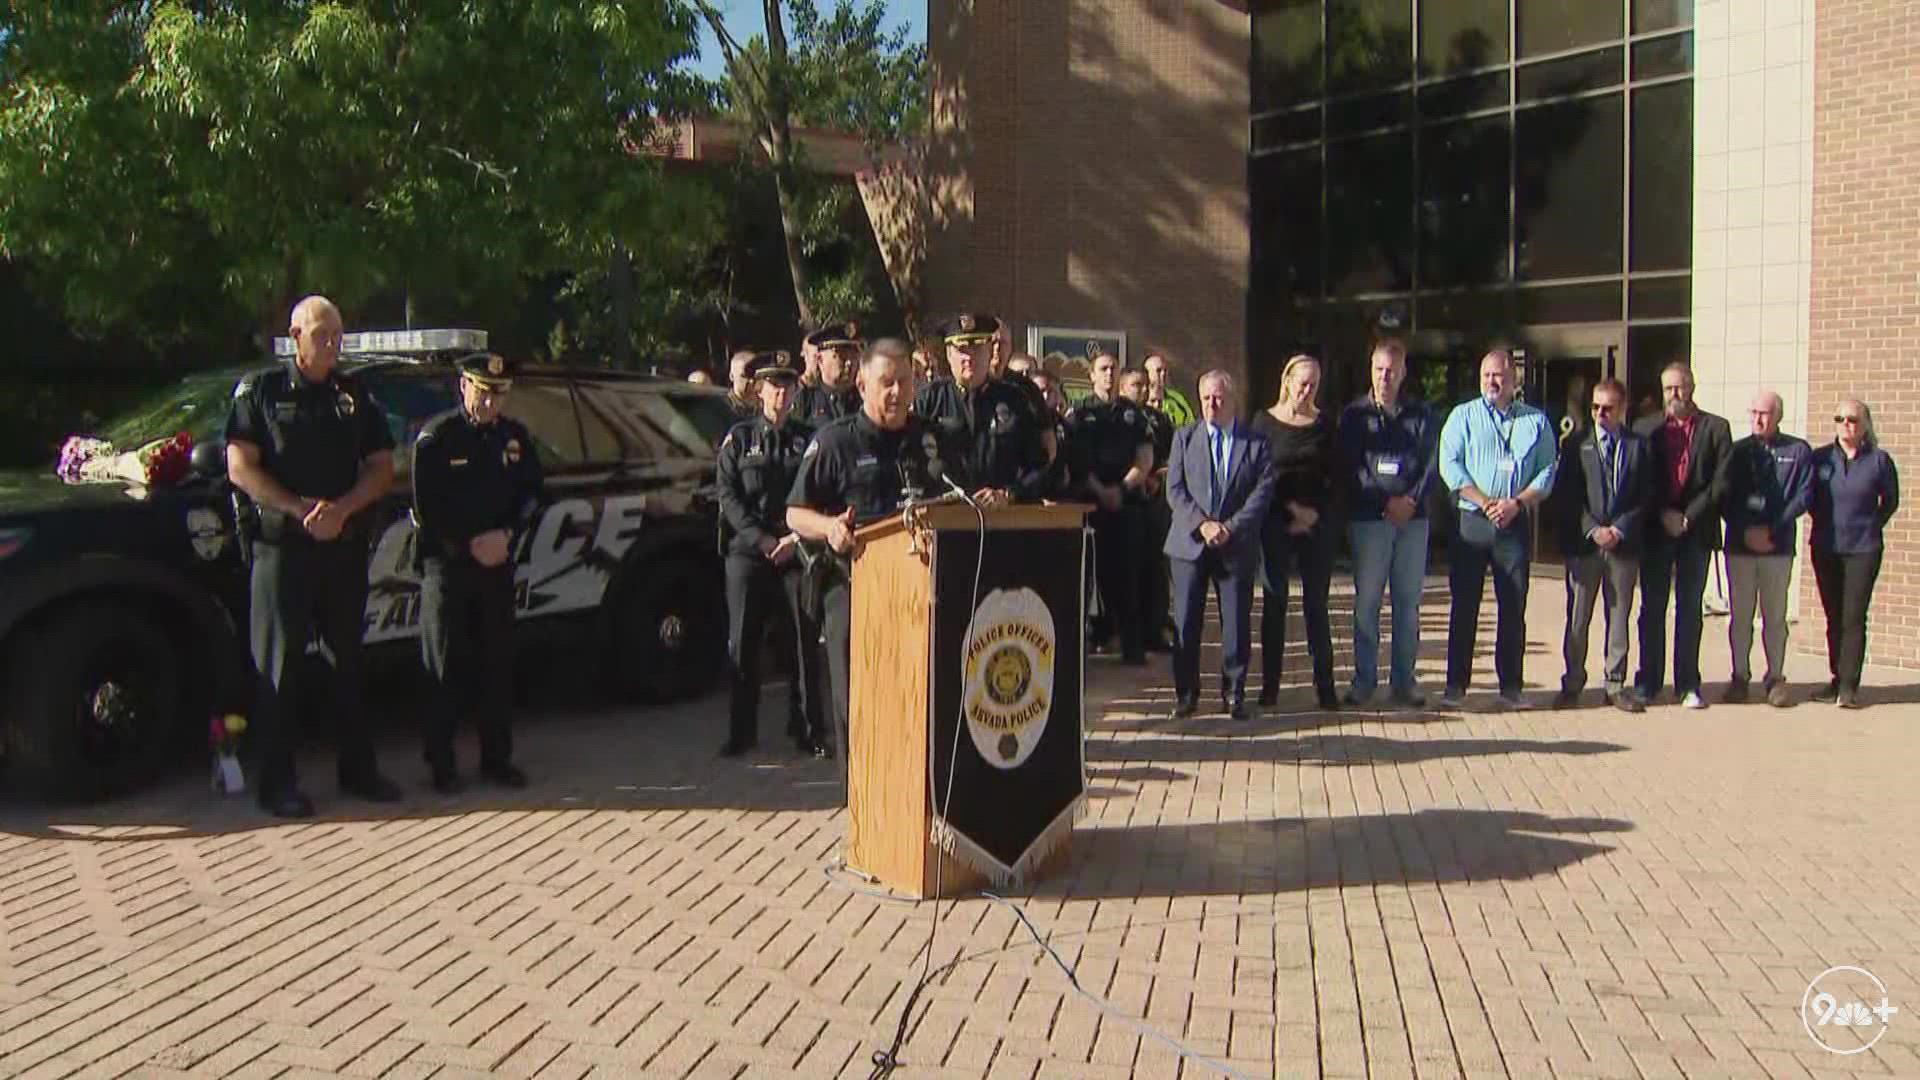 Arvada Police Department gives an update on the line of duty death of an officer Sunday morning.